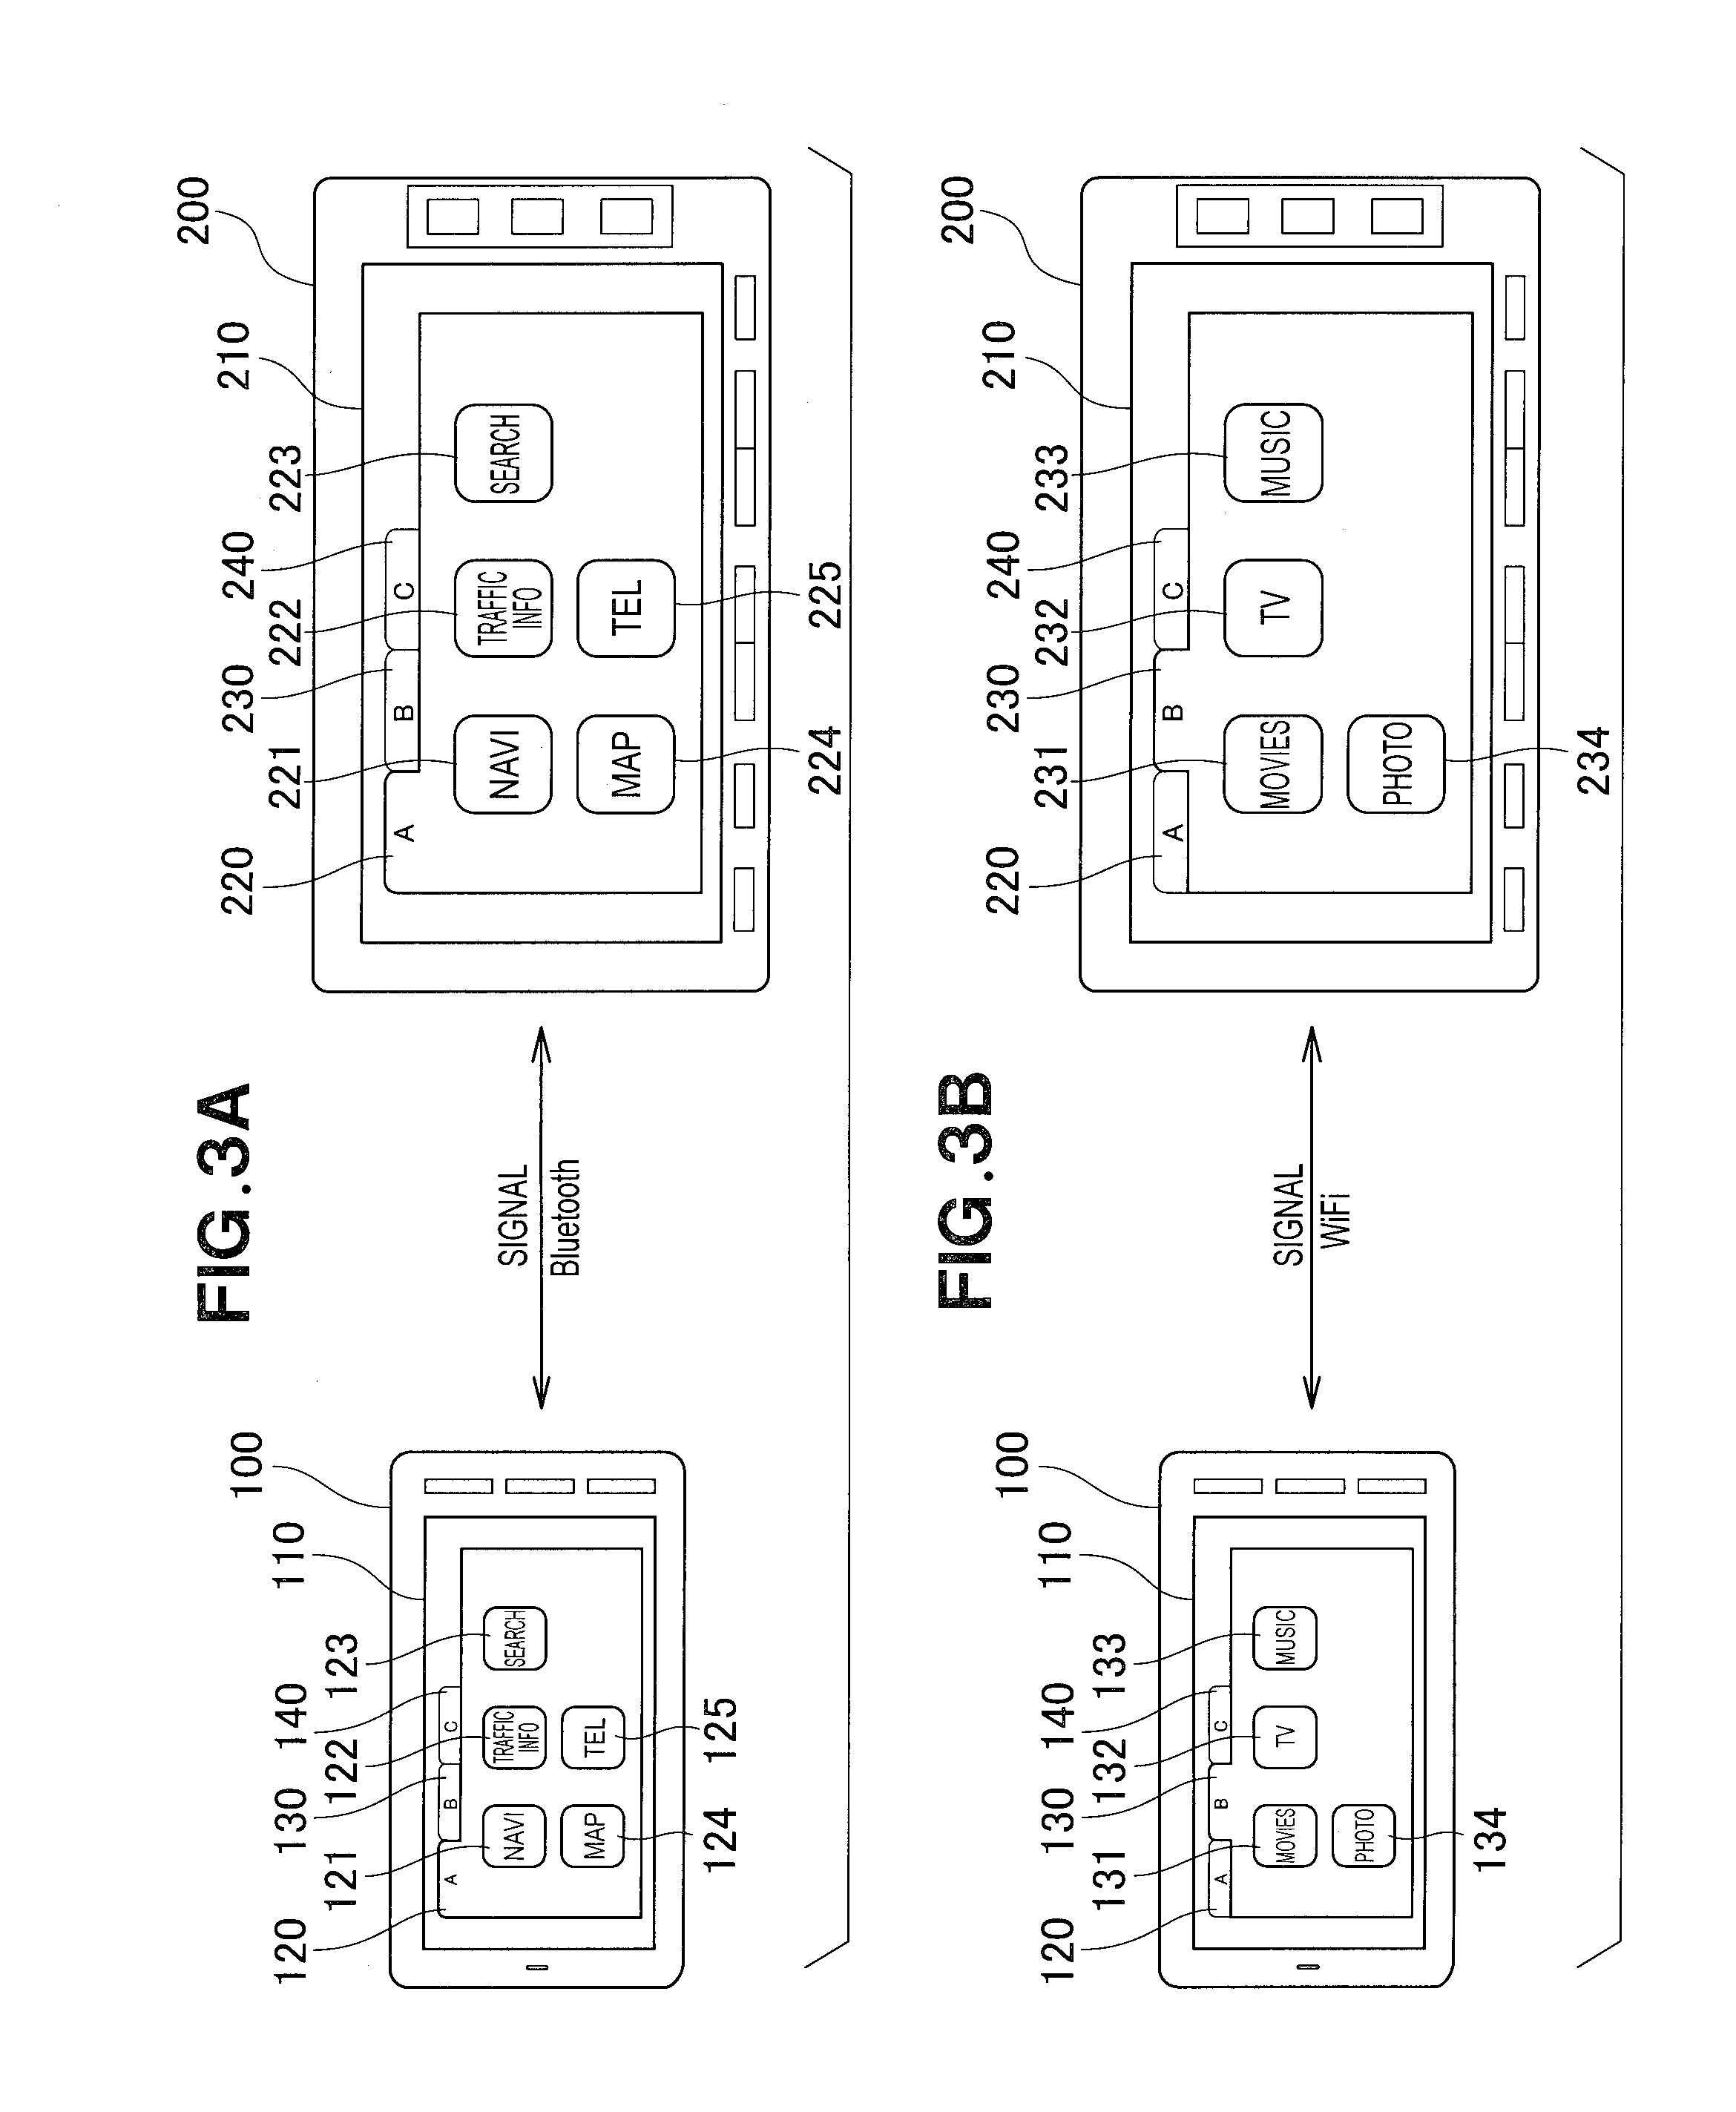 Vehicle on-board unit and mobile device linkage system